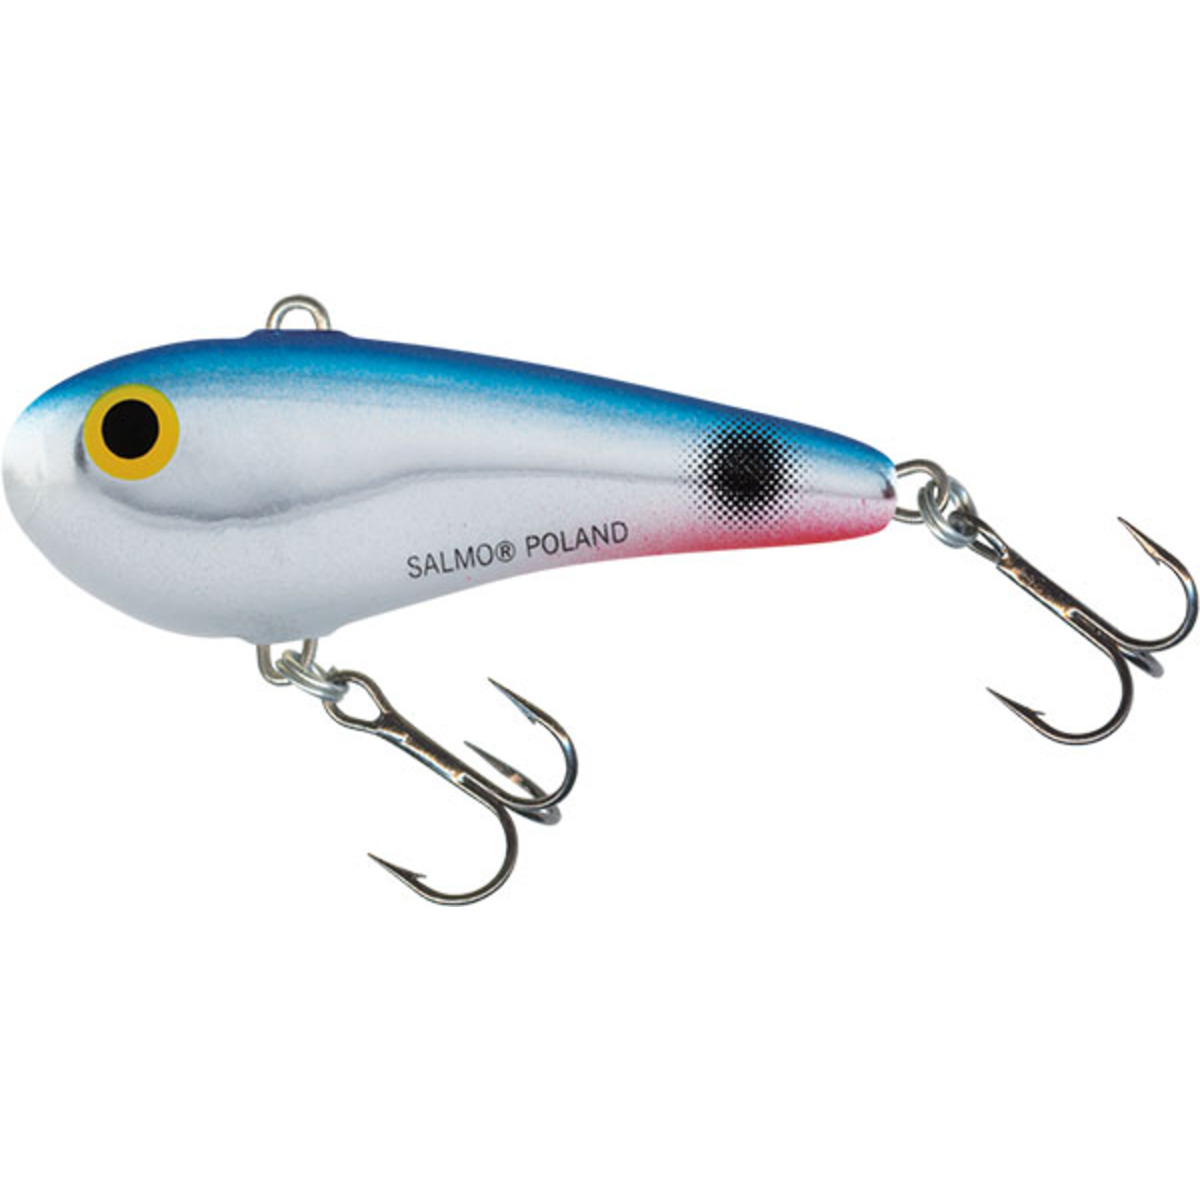 Salmo Chubby Darter Sinking - 3 Cm - Red Tail Shiner